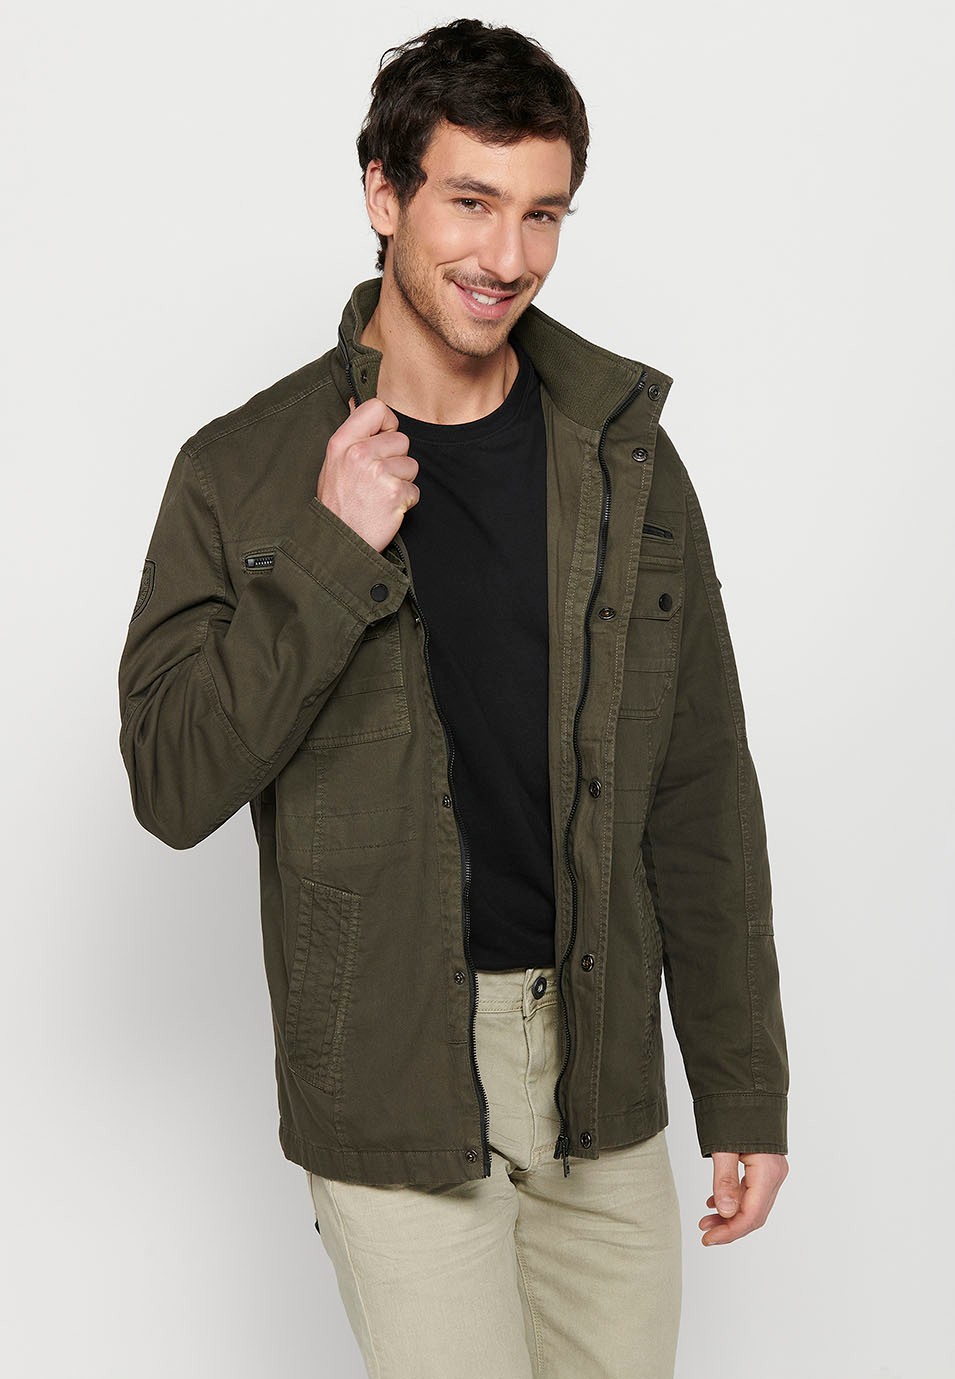 Long Jacket with Zipper Front Closure and Lapel with Stand Collar and Flap Pockets in Olive Color for Men 7